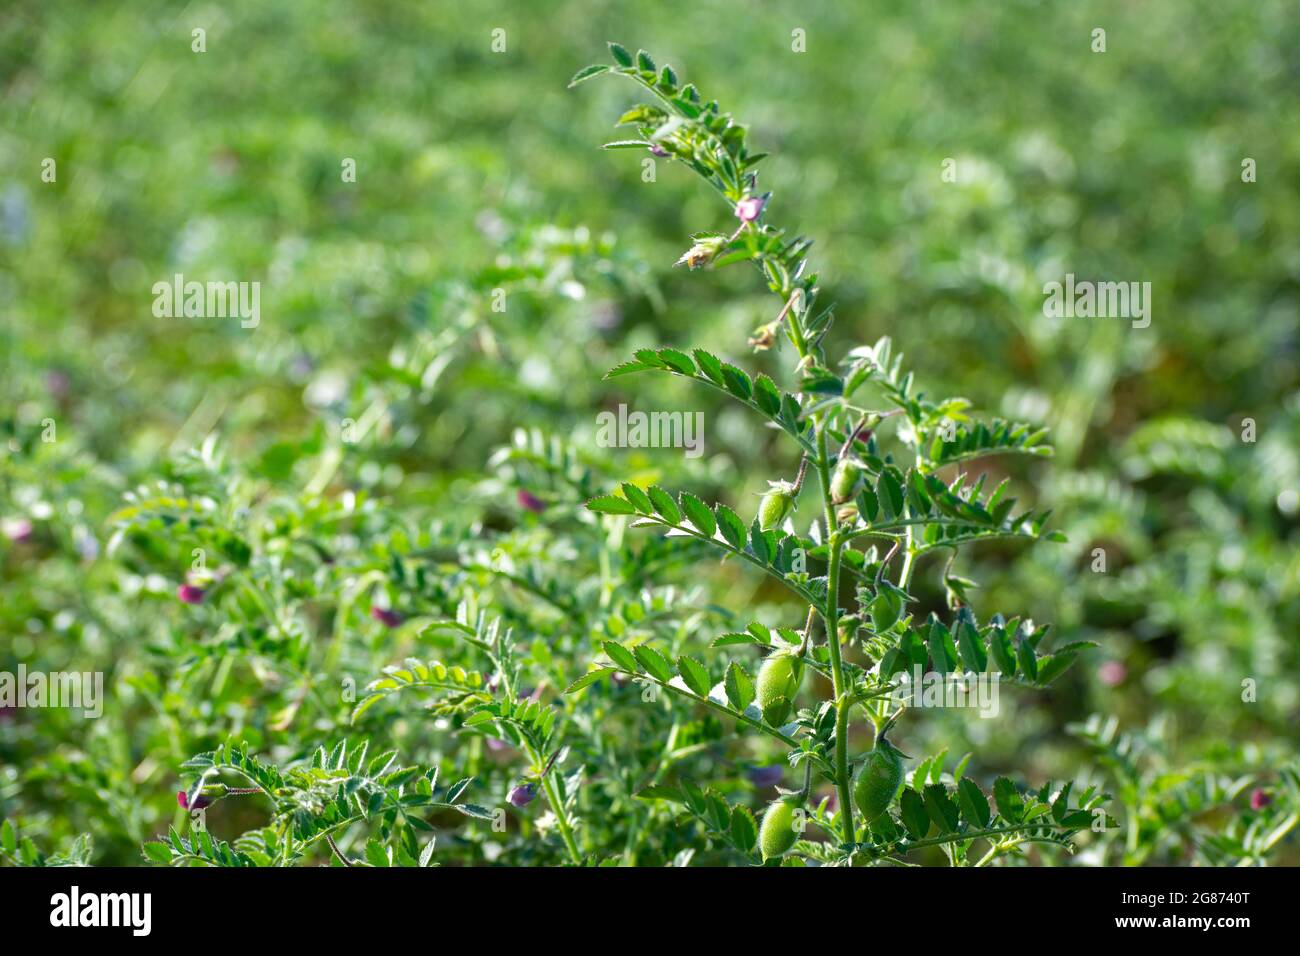 Green pods of chickpeas grow on a plant Stock Photo